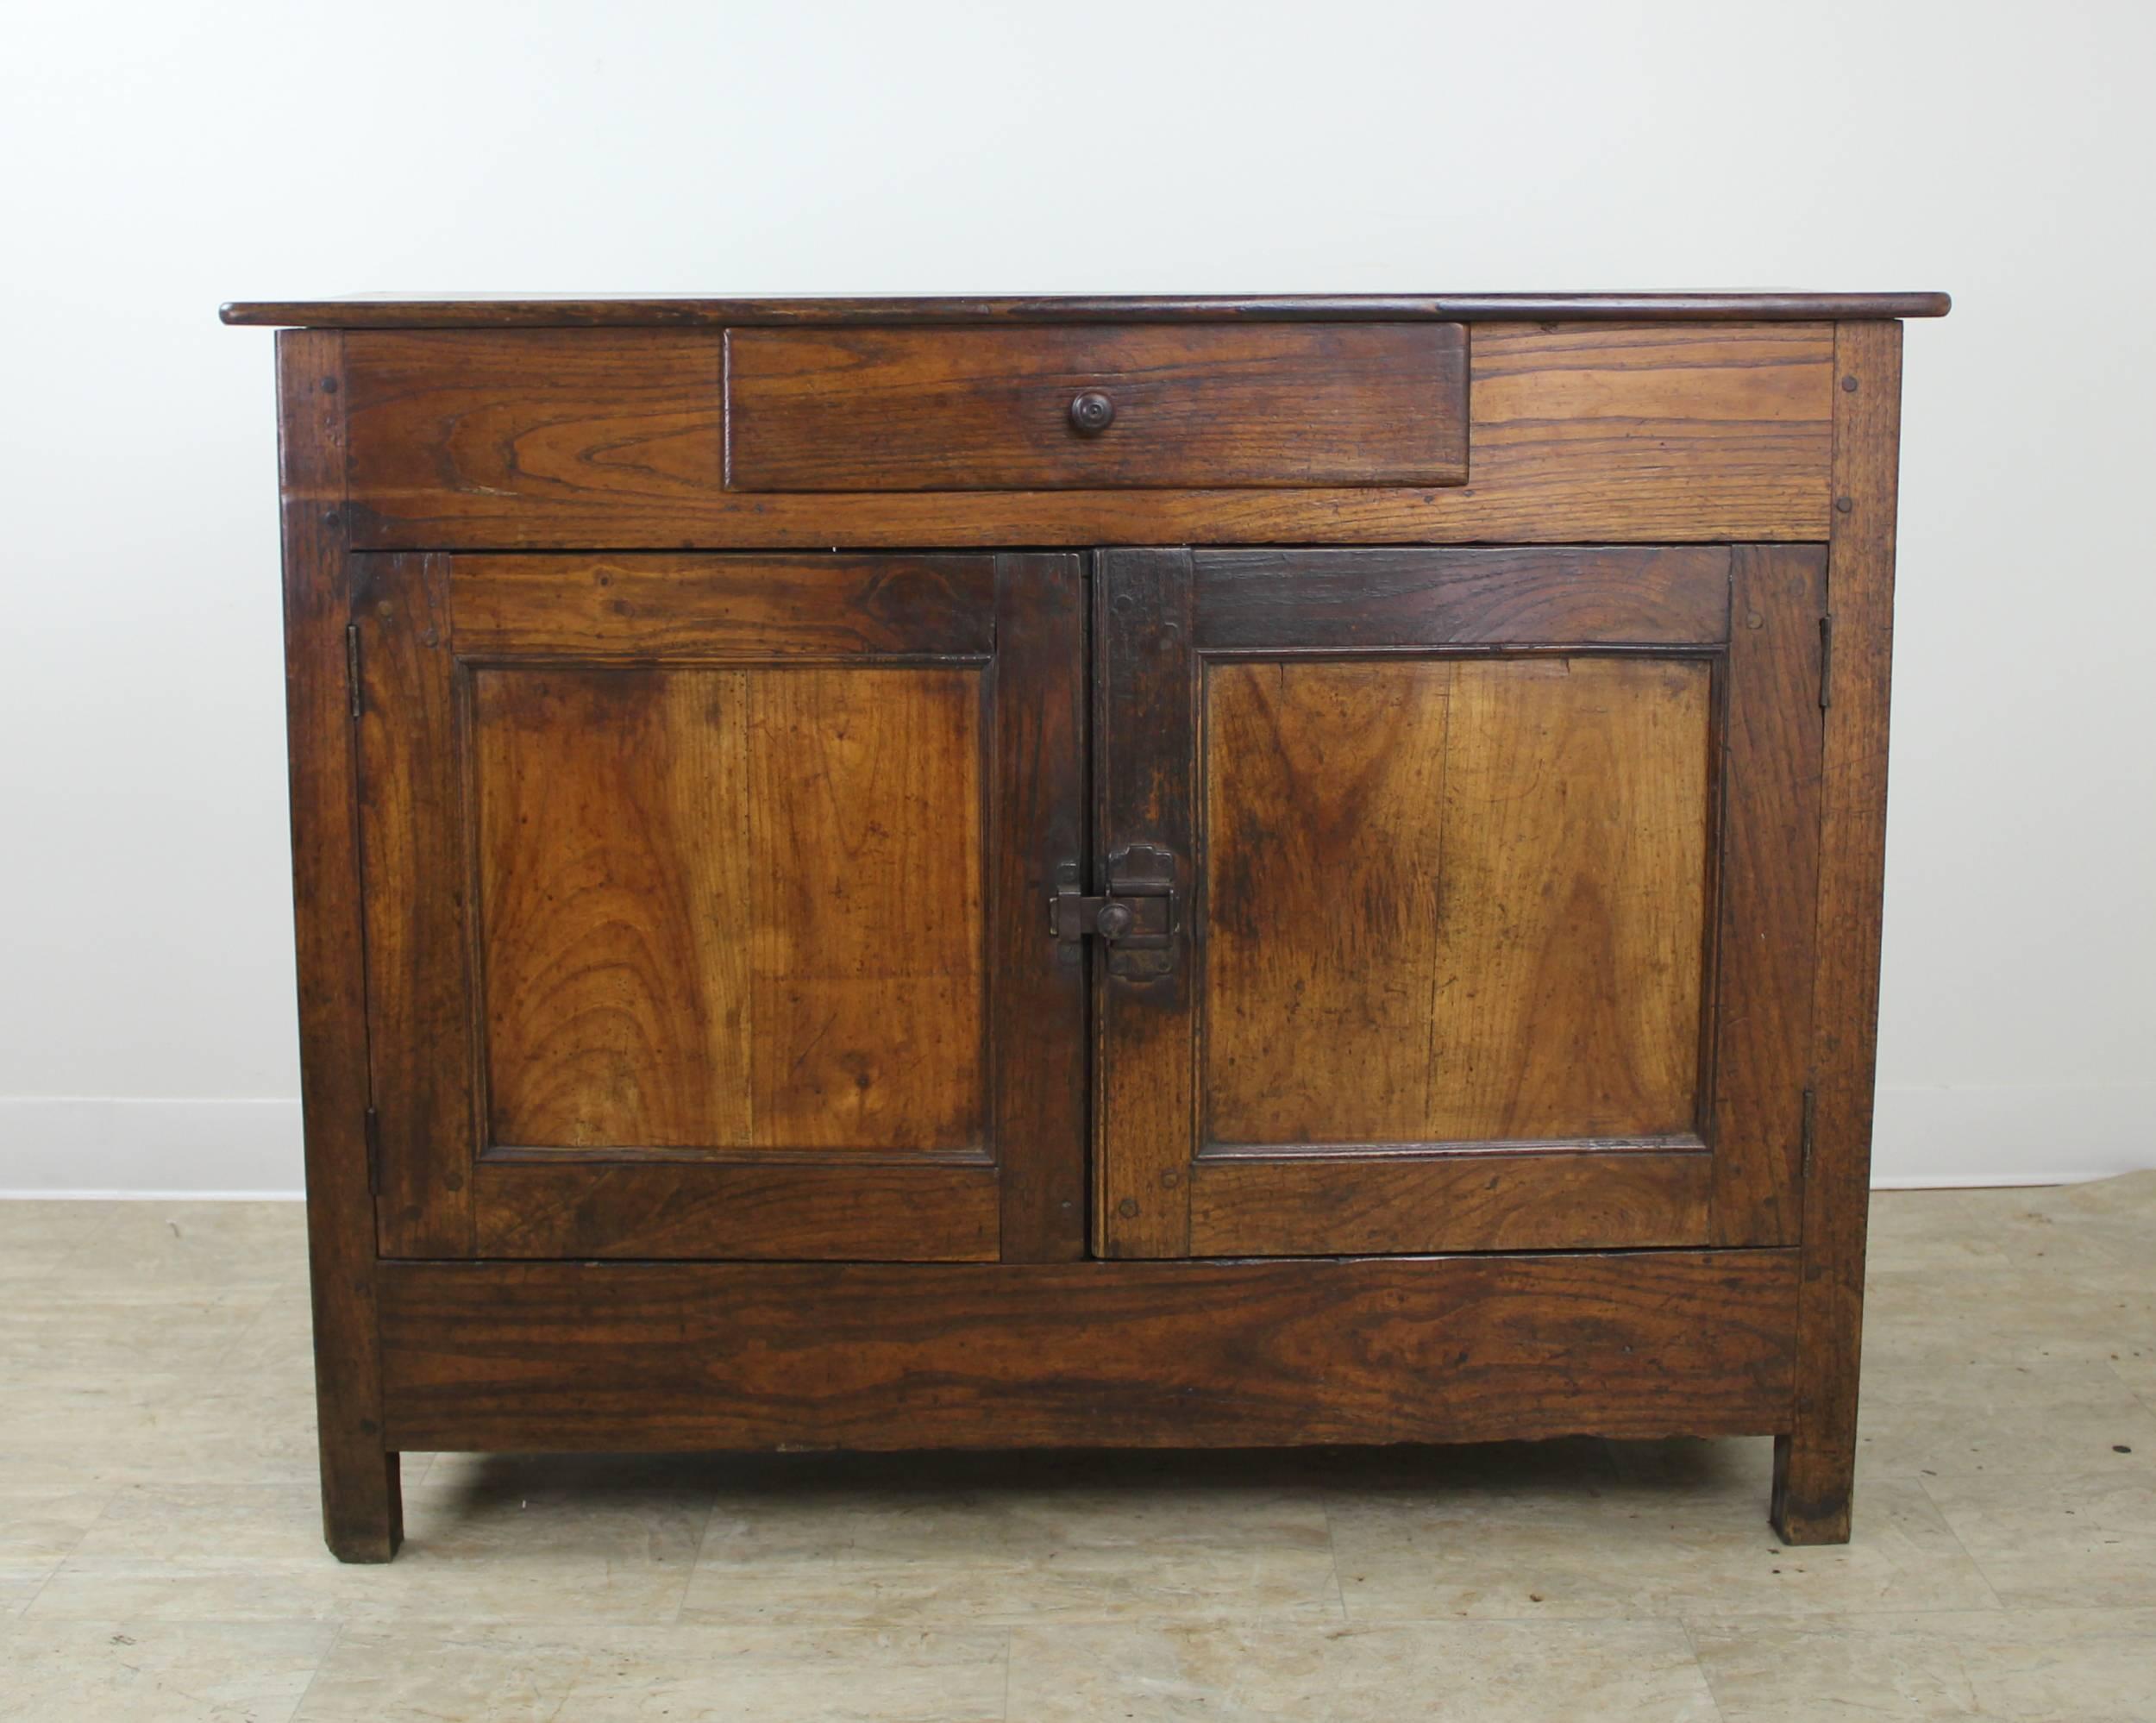 A simple and handsome chestnut server, sideboard or buffet from France. The piece has lovely grain and is in wonderful antique condition! Inset panels on doors and sides add visual interest. Iron latch closure gives a rustic look and closes snugly.